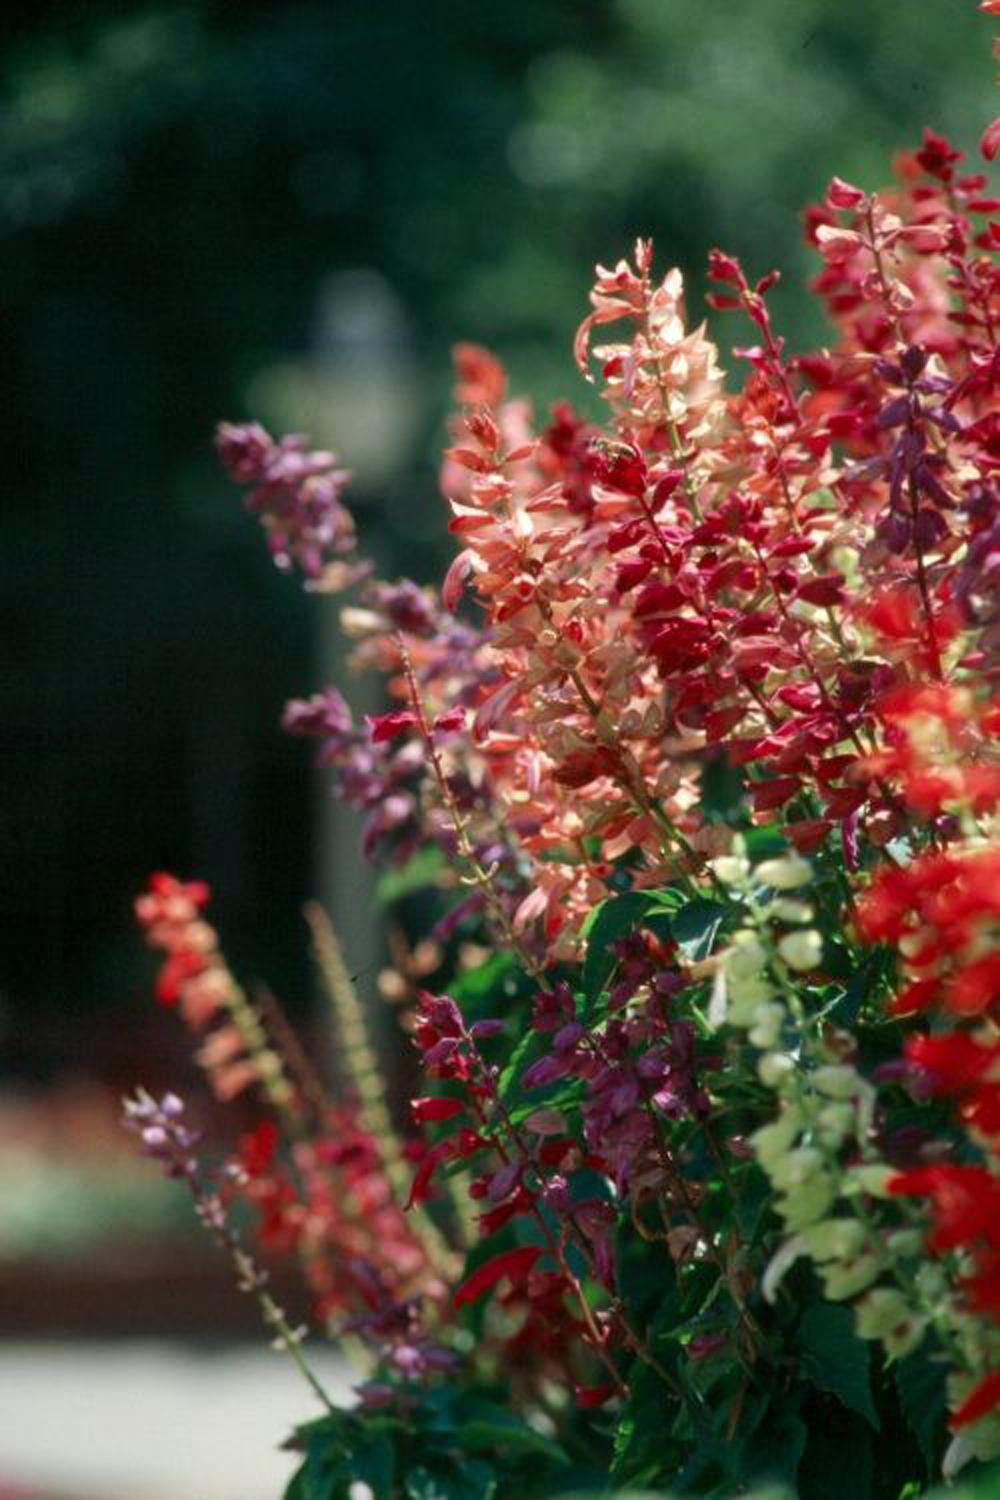 Scarlet sage is now available in a range of colors, all of which are sure to add sizzle to the landscape.